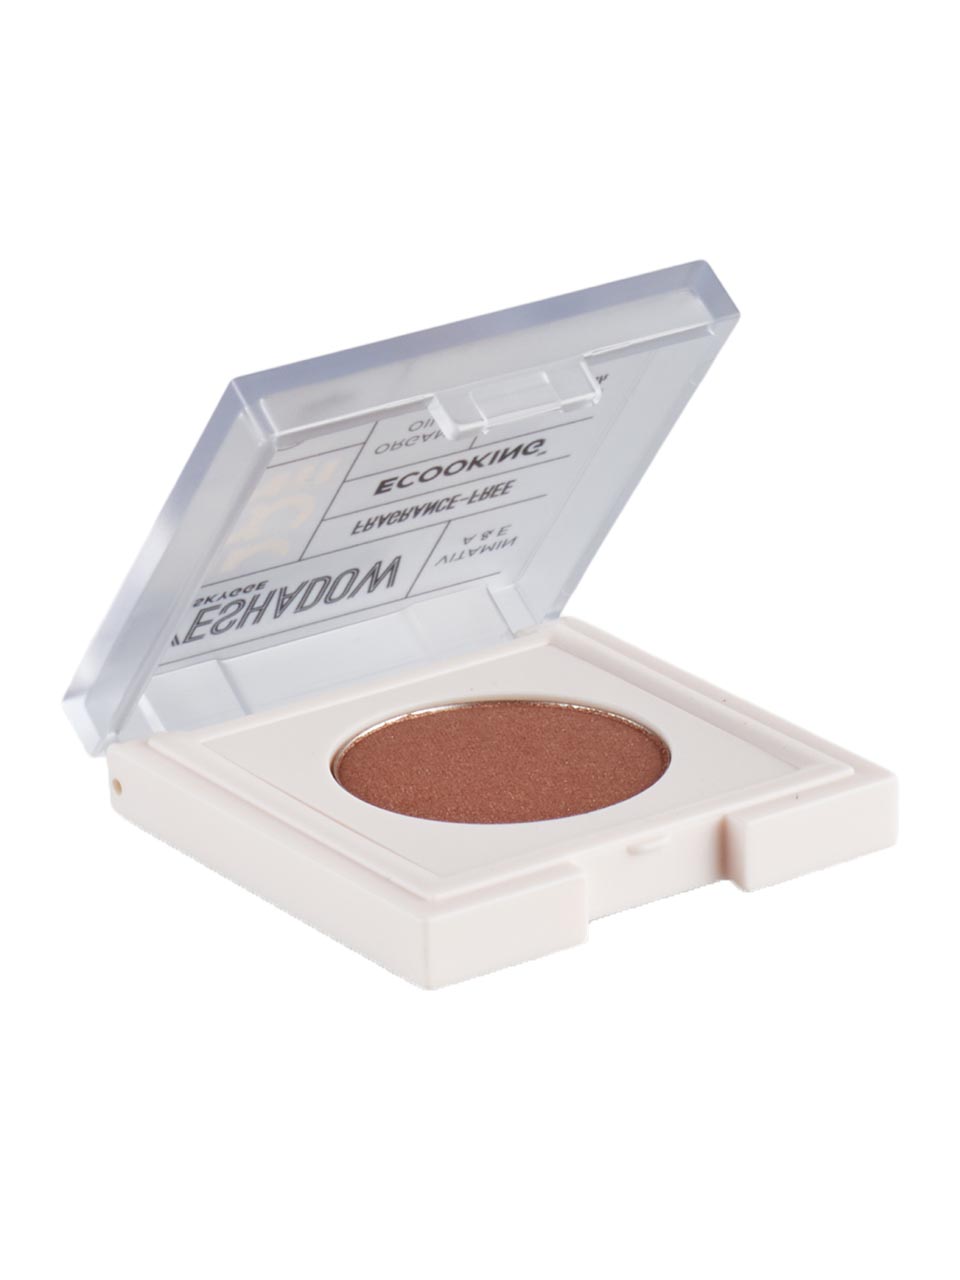 Ecooking Make-up Eye Shadow N° 04 Blossom null - onesize - 1